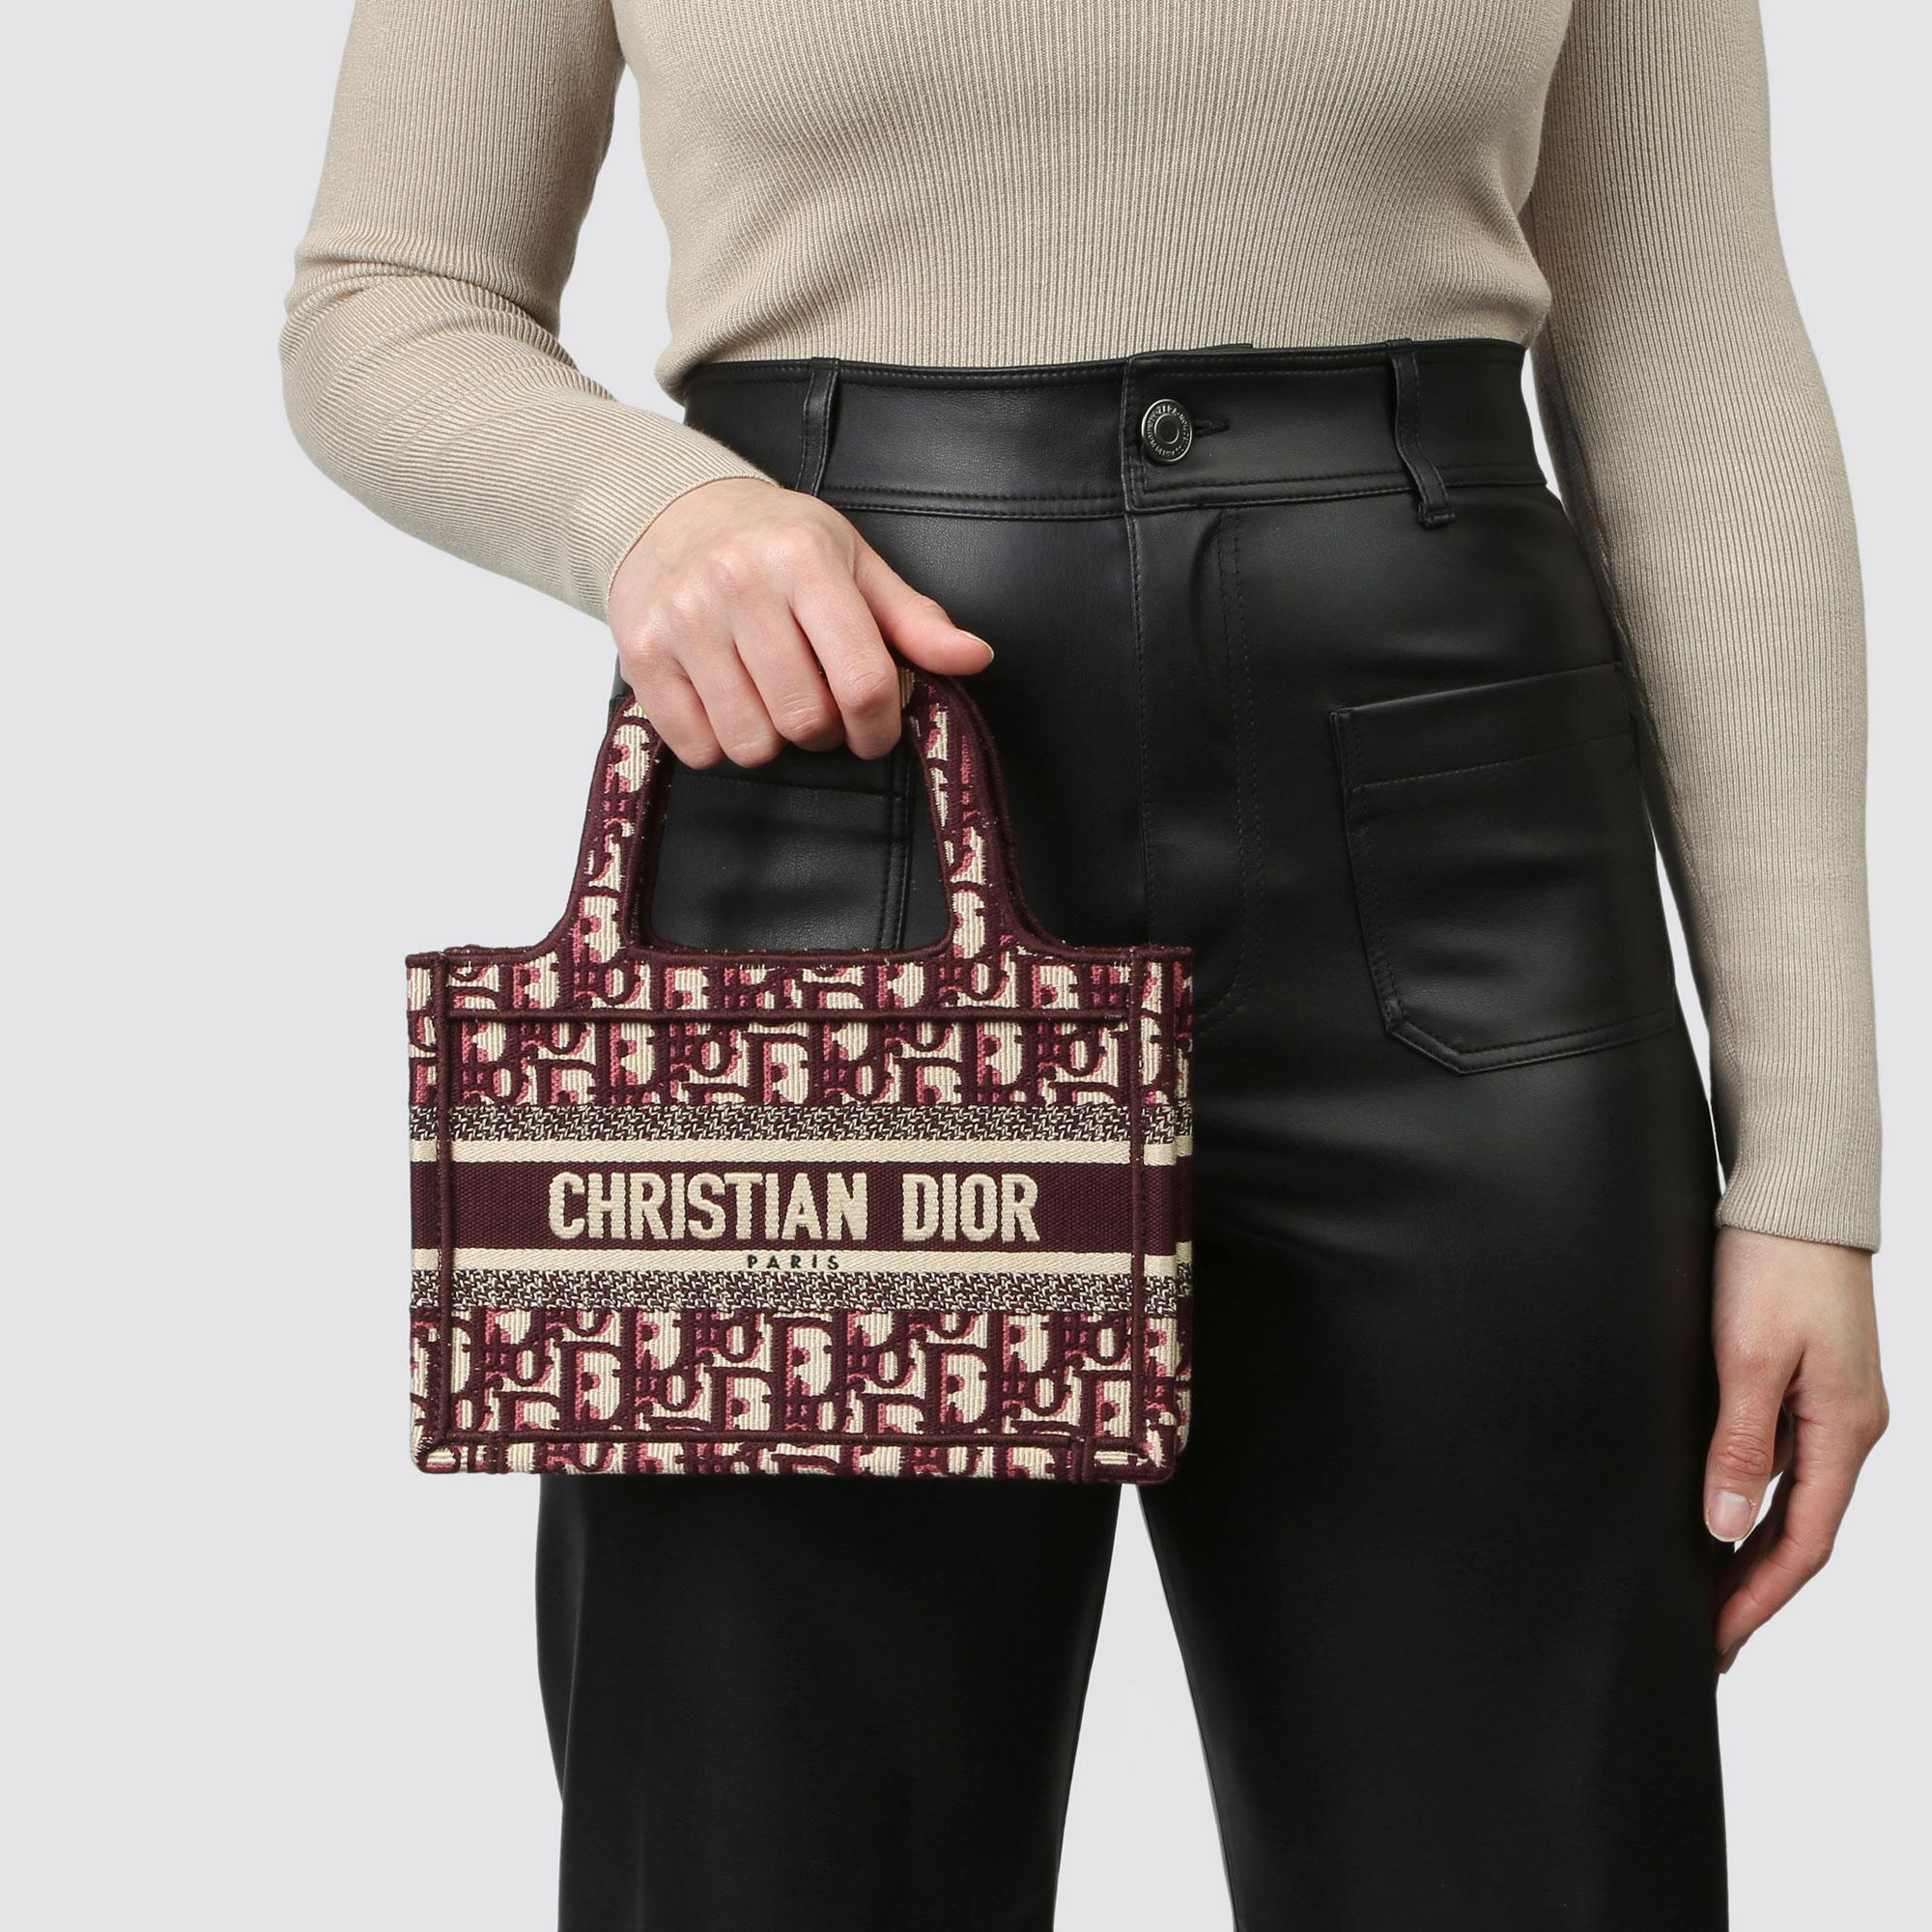 CHRISTIAN DIOR
Burgundy Oblique Monogram Canvas Mini Book Tote 

Xupes Reference: HB3891
Serial Number: 50-MA-0189
Age (Circa): 2019
Accompanied By: Christian Dior Dust Bag, Box, Authenticity Card
Authenticity Details: Authenticity Card, Date Stamp